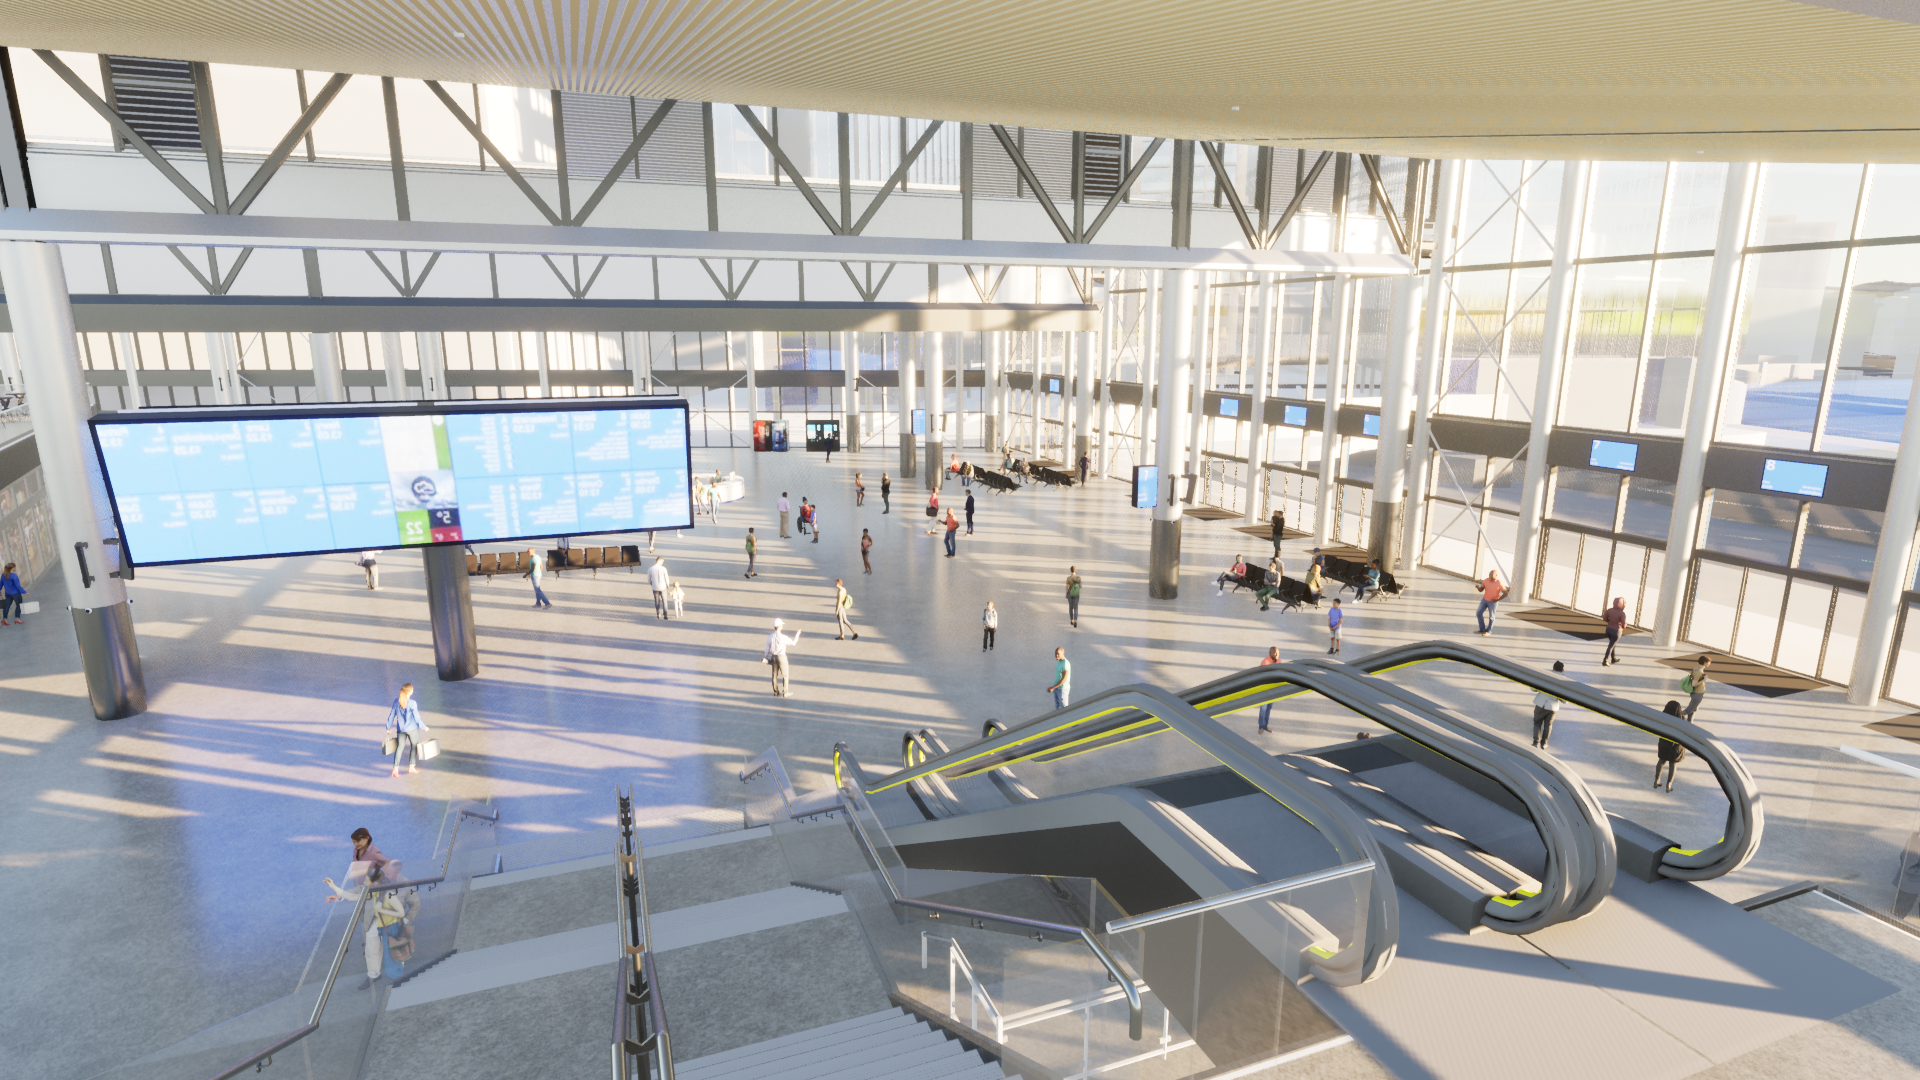 Artist rendering of the interior of the train station, bright and airy